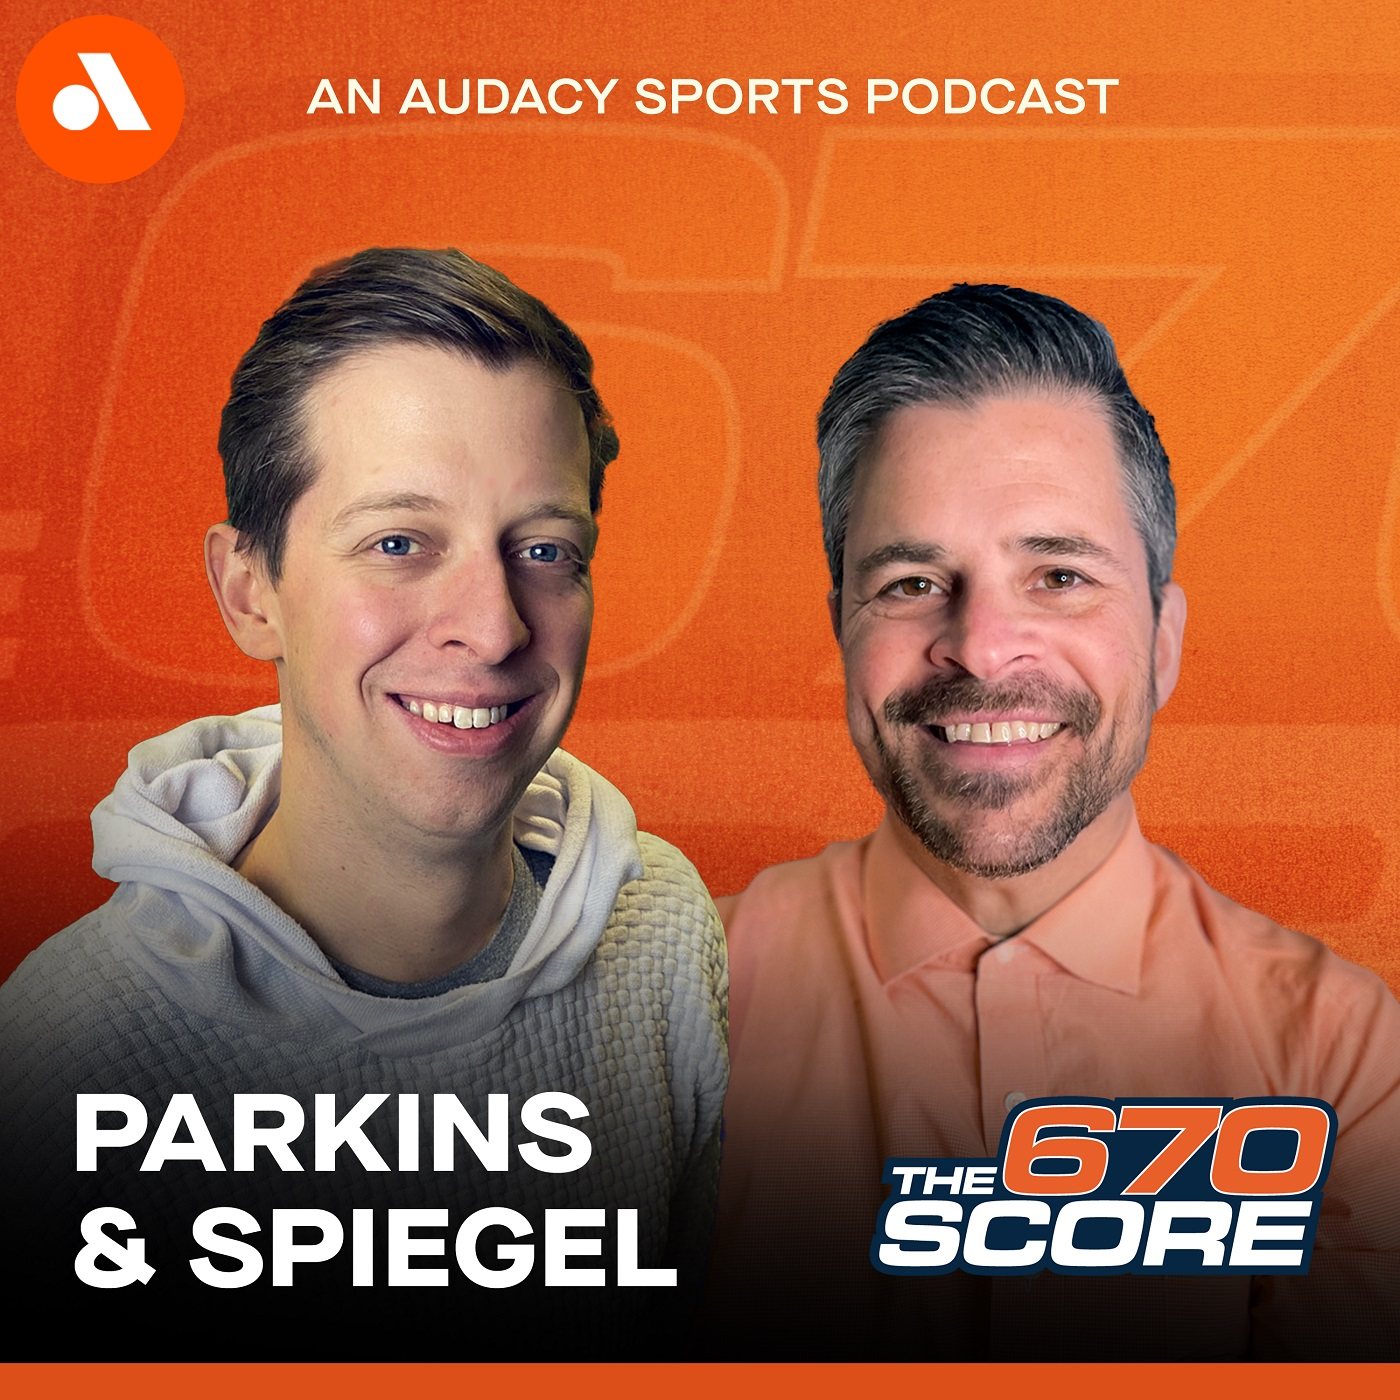 Parkins & Spiegel: They're talking about us on TV (Hour 1)